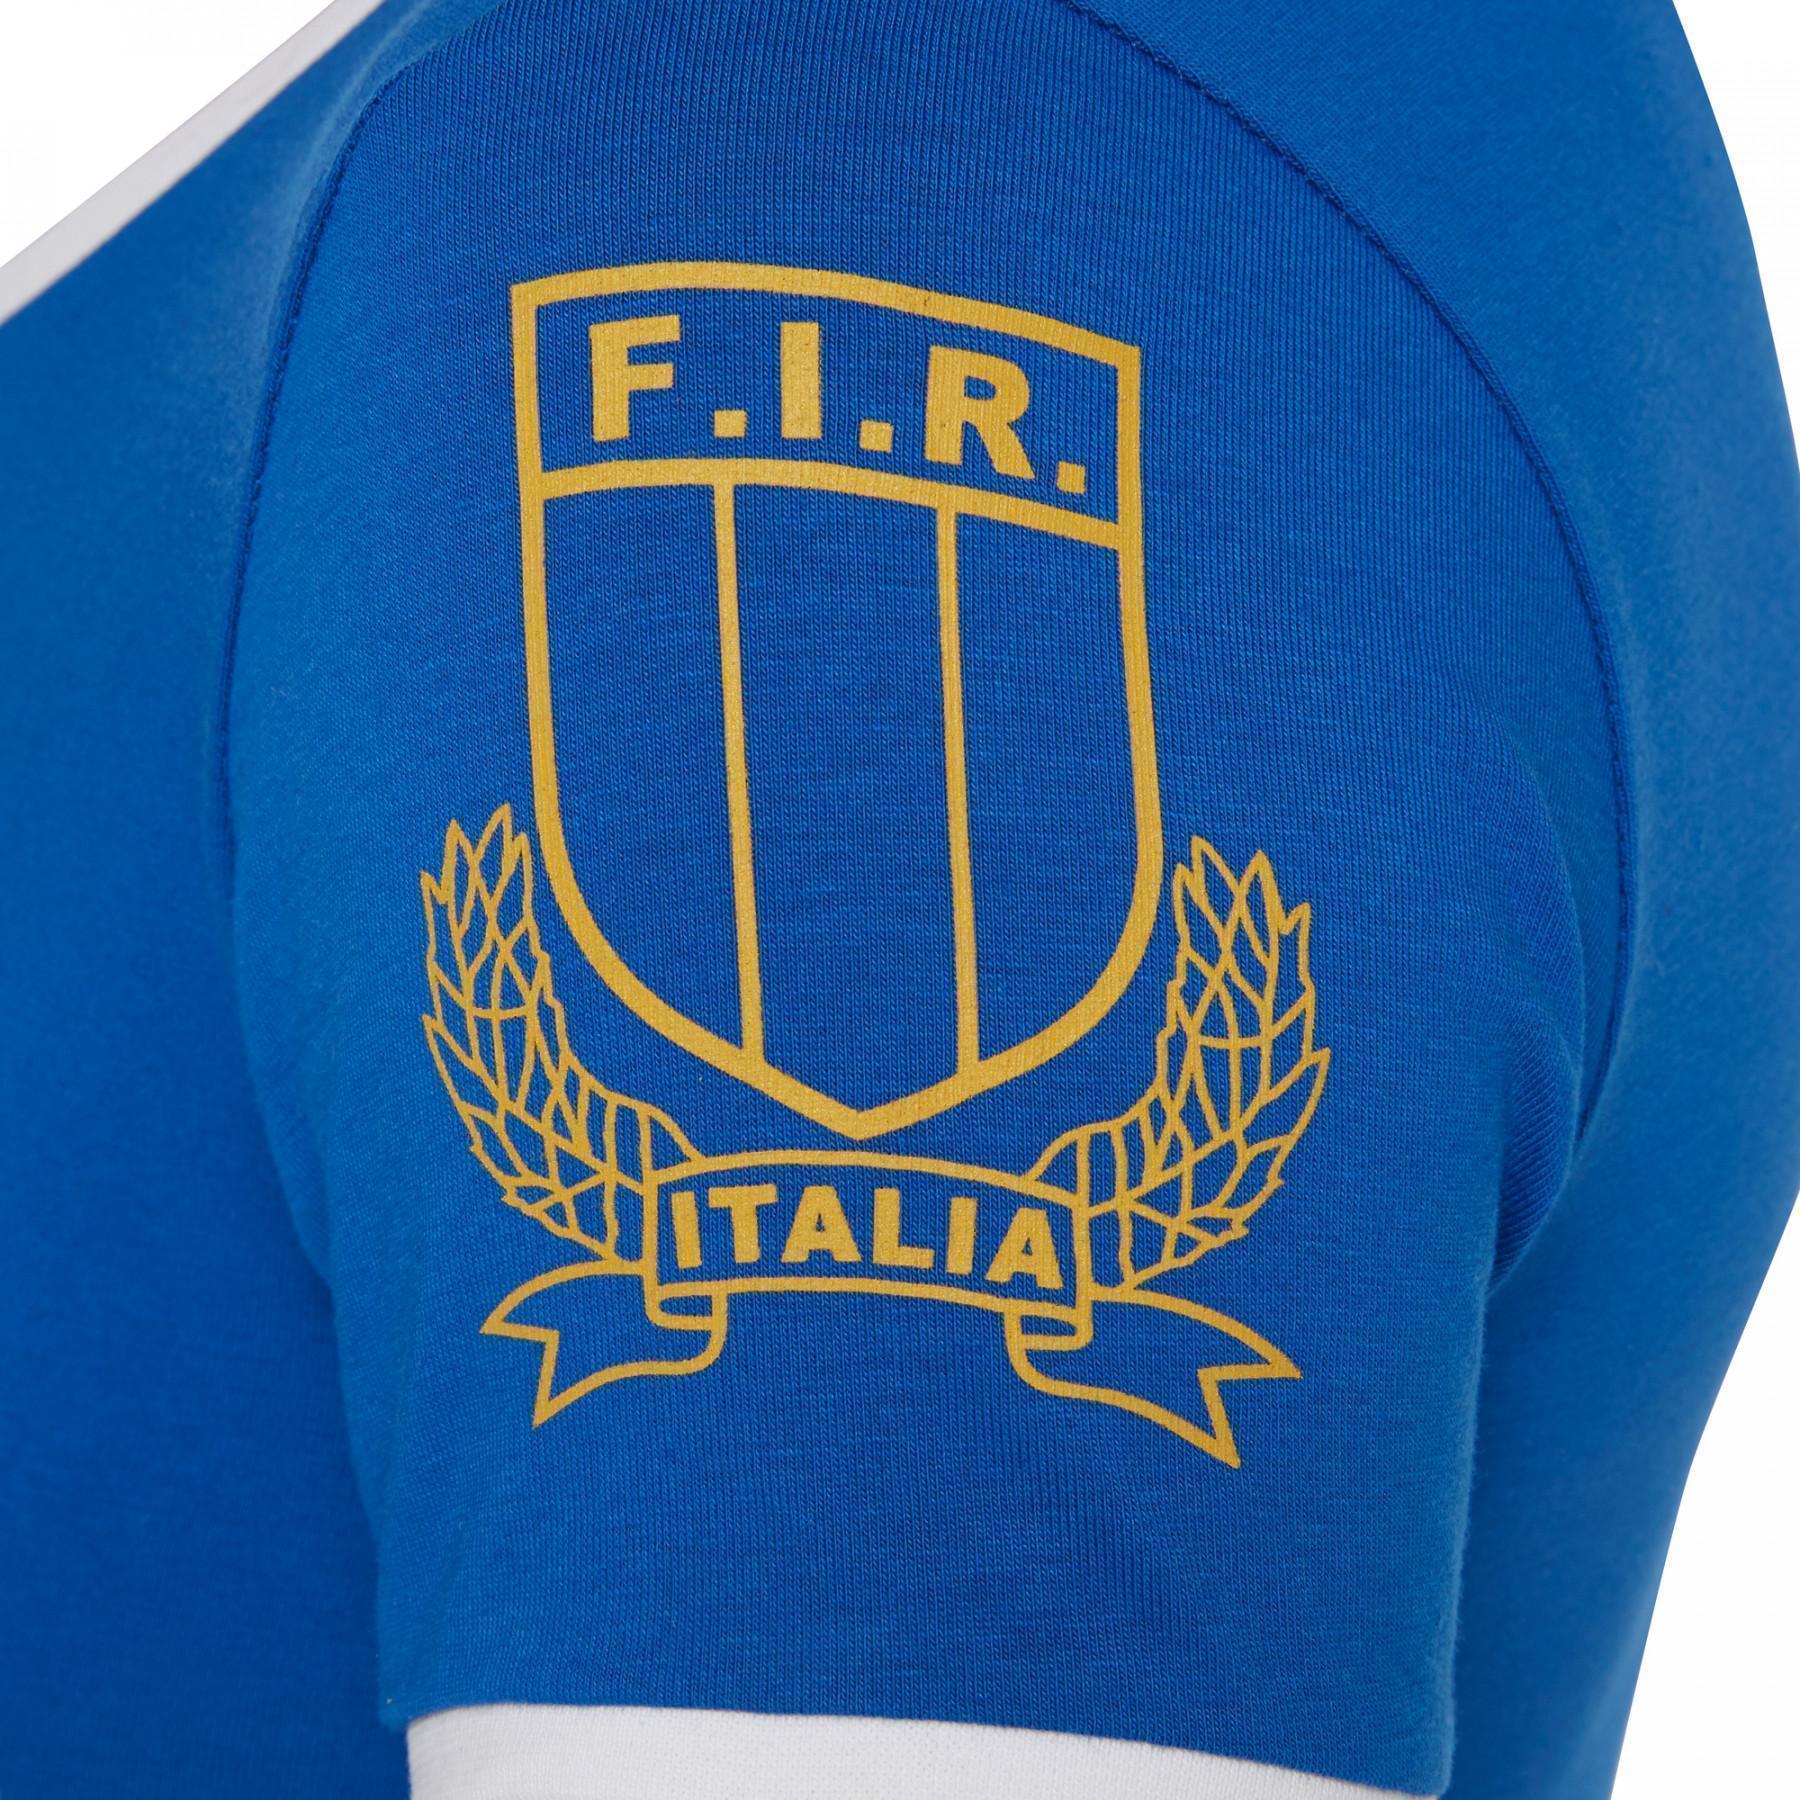 Fan T-shirt donna Italie Rugby 2017-2018